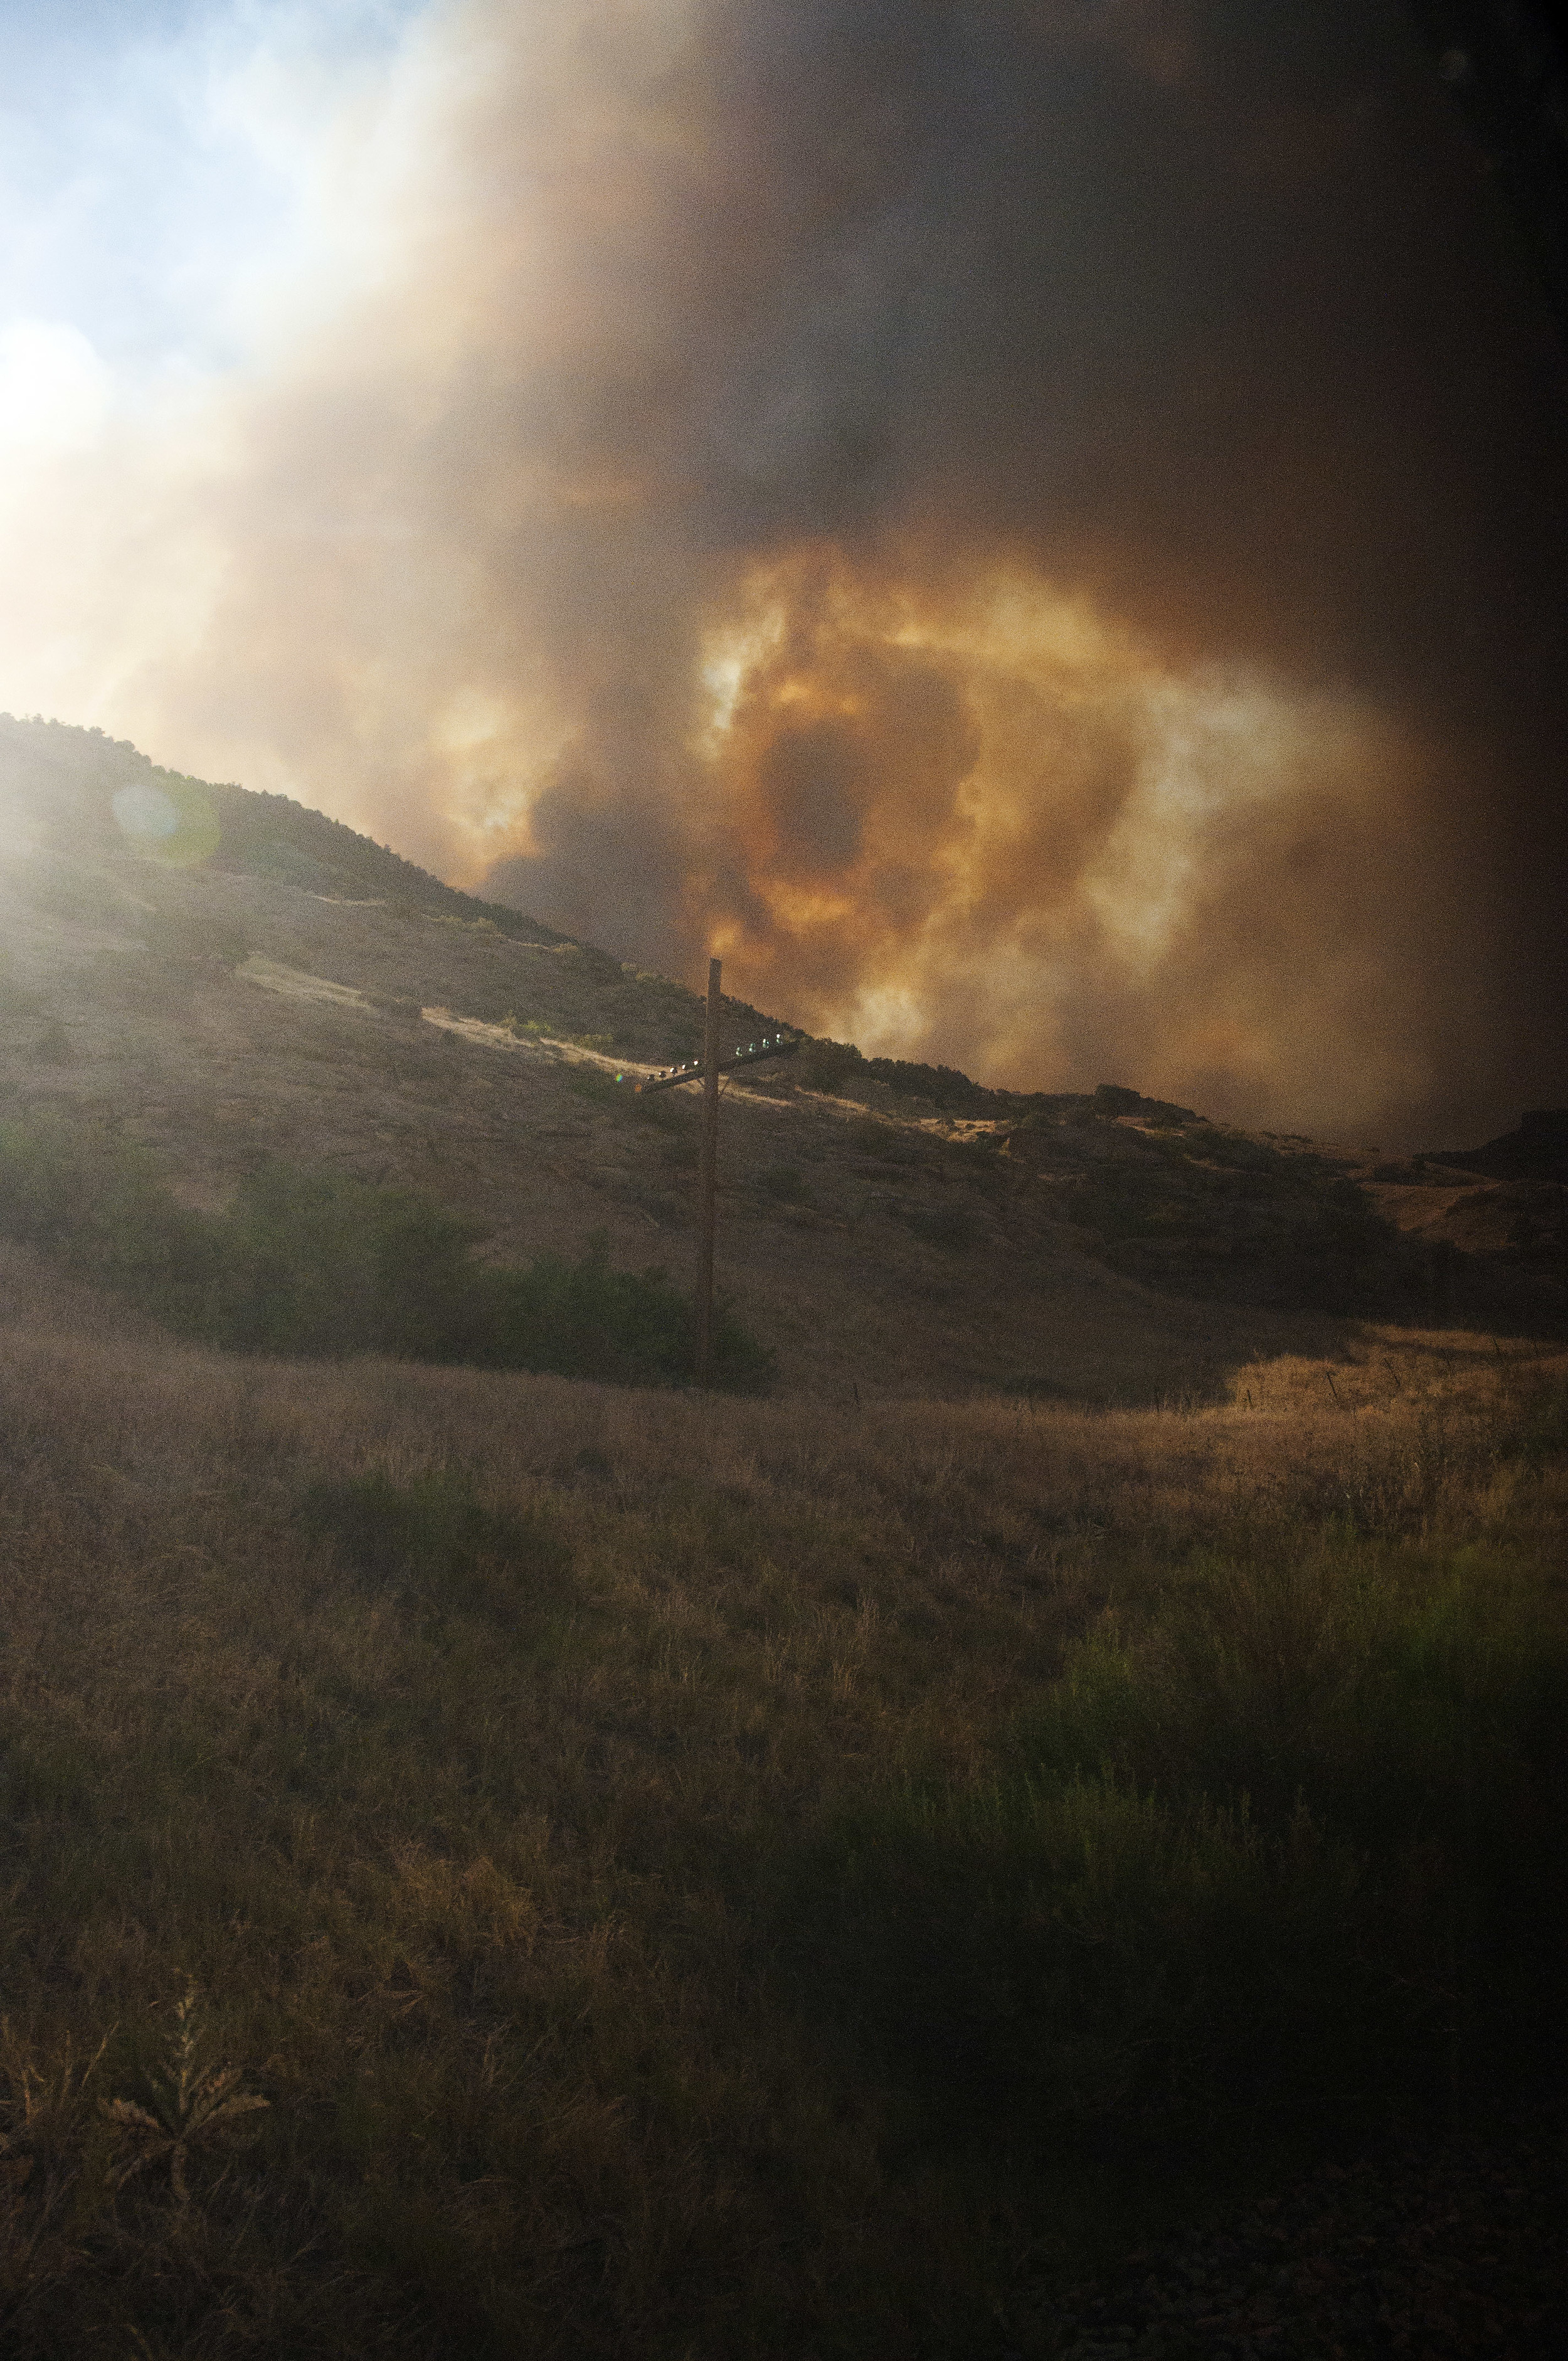  The Pine Ridge fire burns down into De Beque Canyon near Grand Junction, CO on 28 June 2012. The fire, seen here from an Amtrak train, shut down both the railway line and Interstate 70 for hours until the wind pushed it back atop the surrounding mes